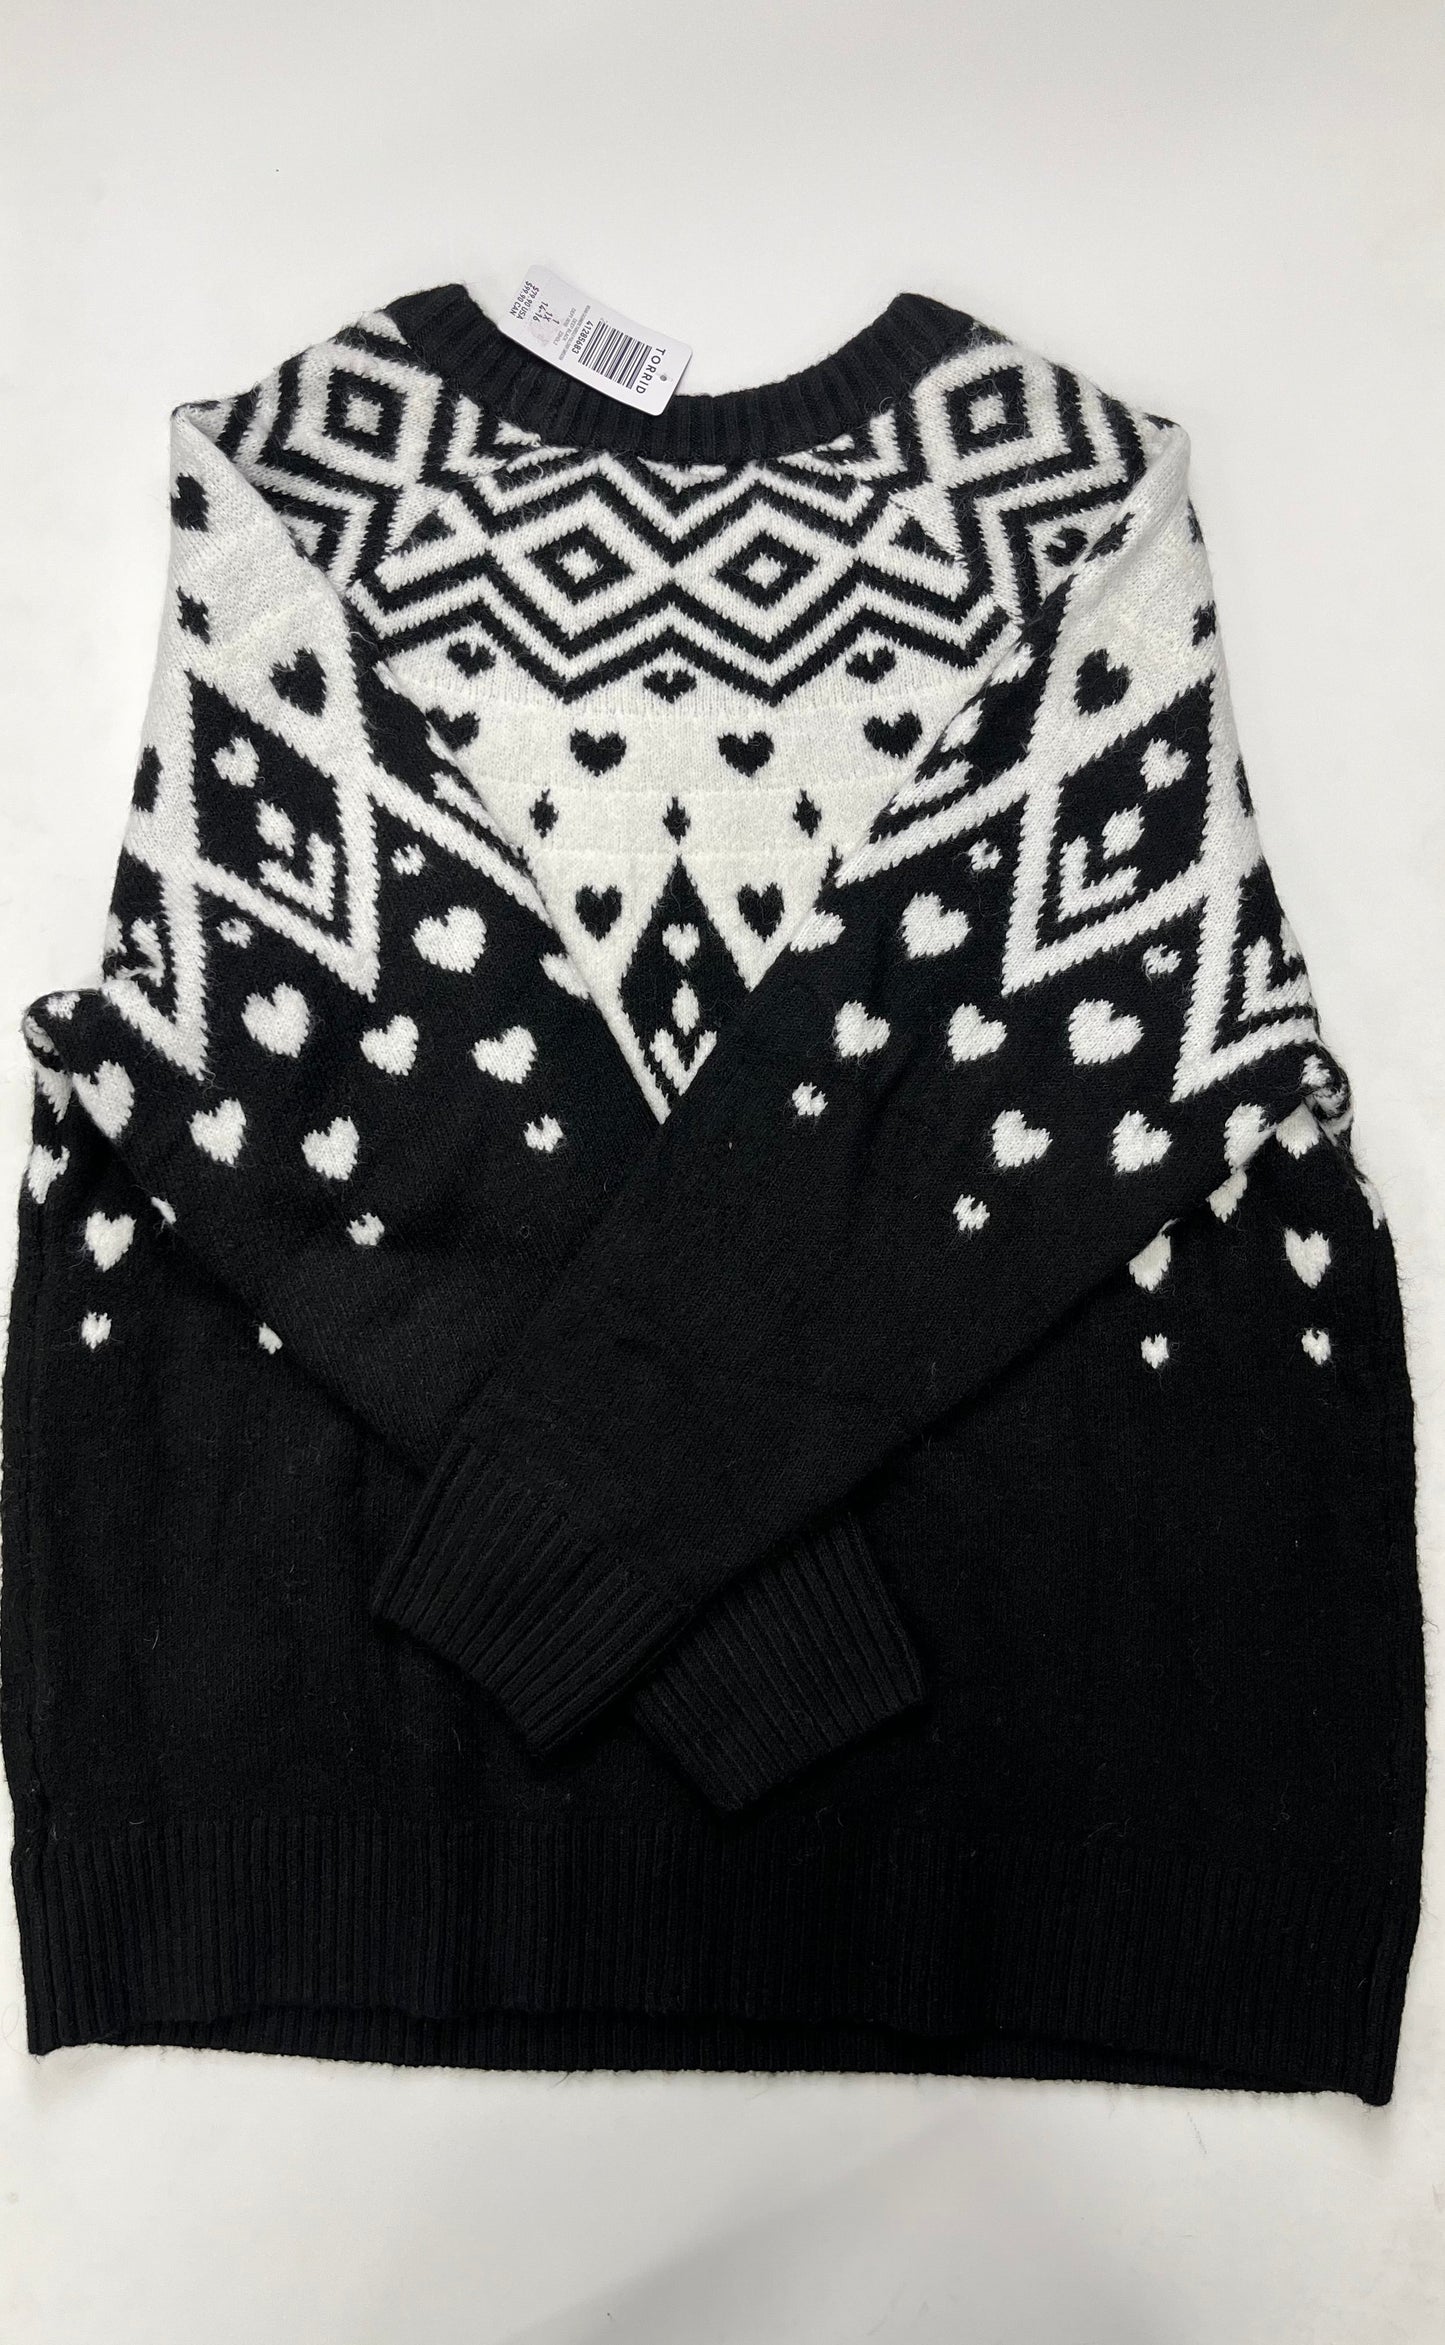 Sweater By Torrid NWT Size: 1x